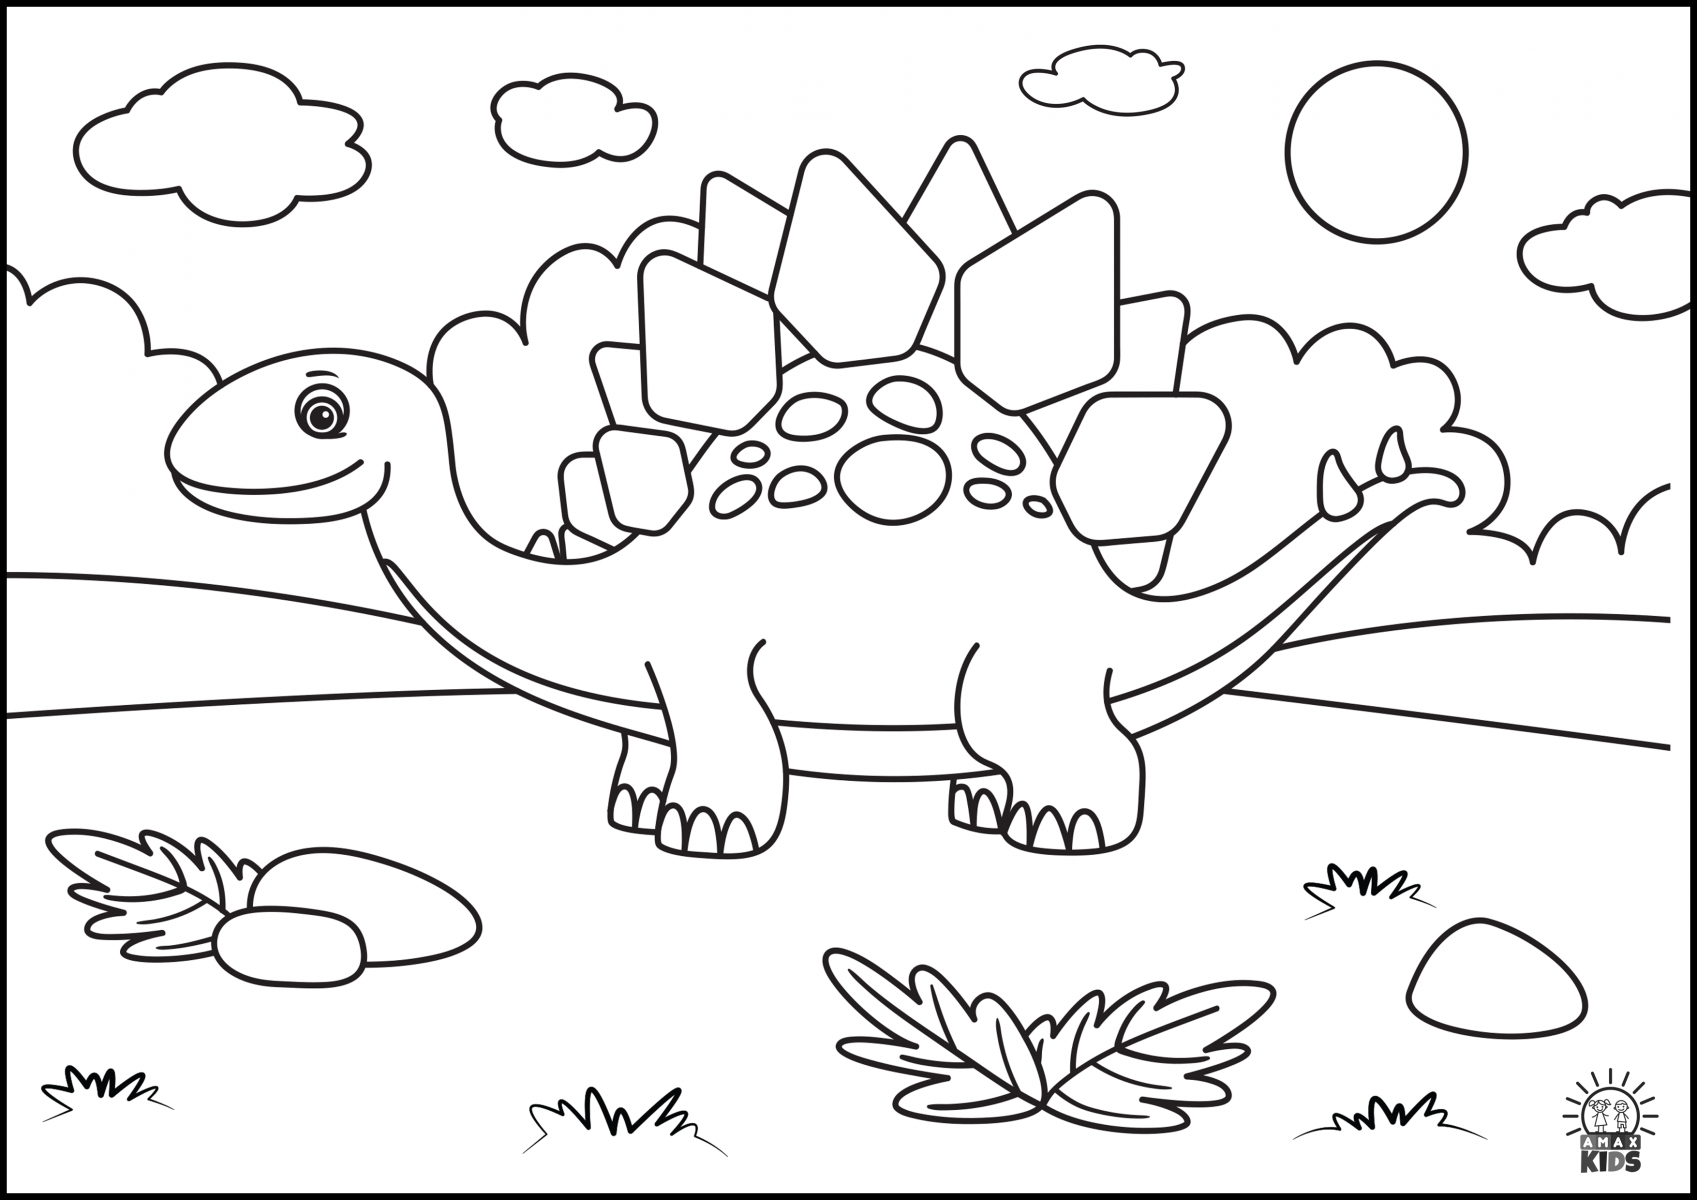 Printable Dinosaurs Coloring Pages for Kids | Amax Kids